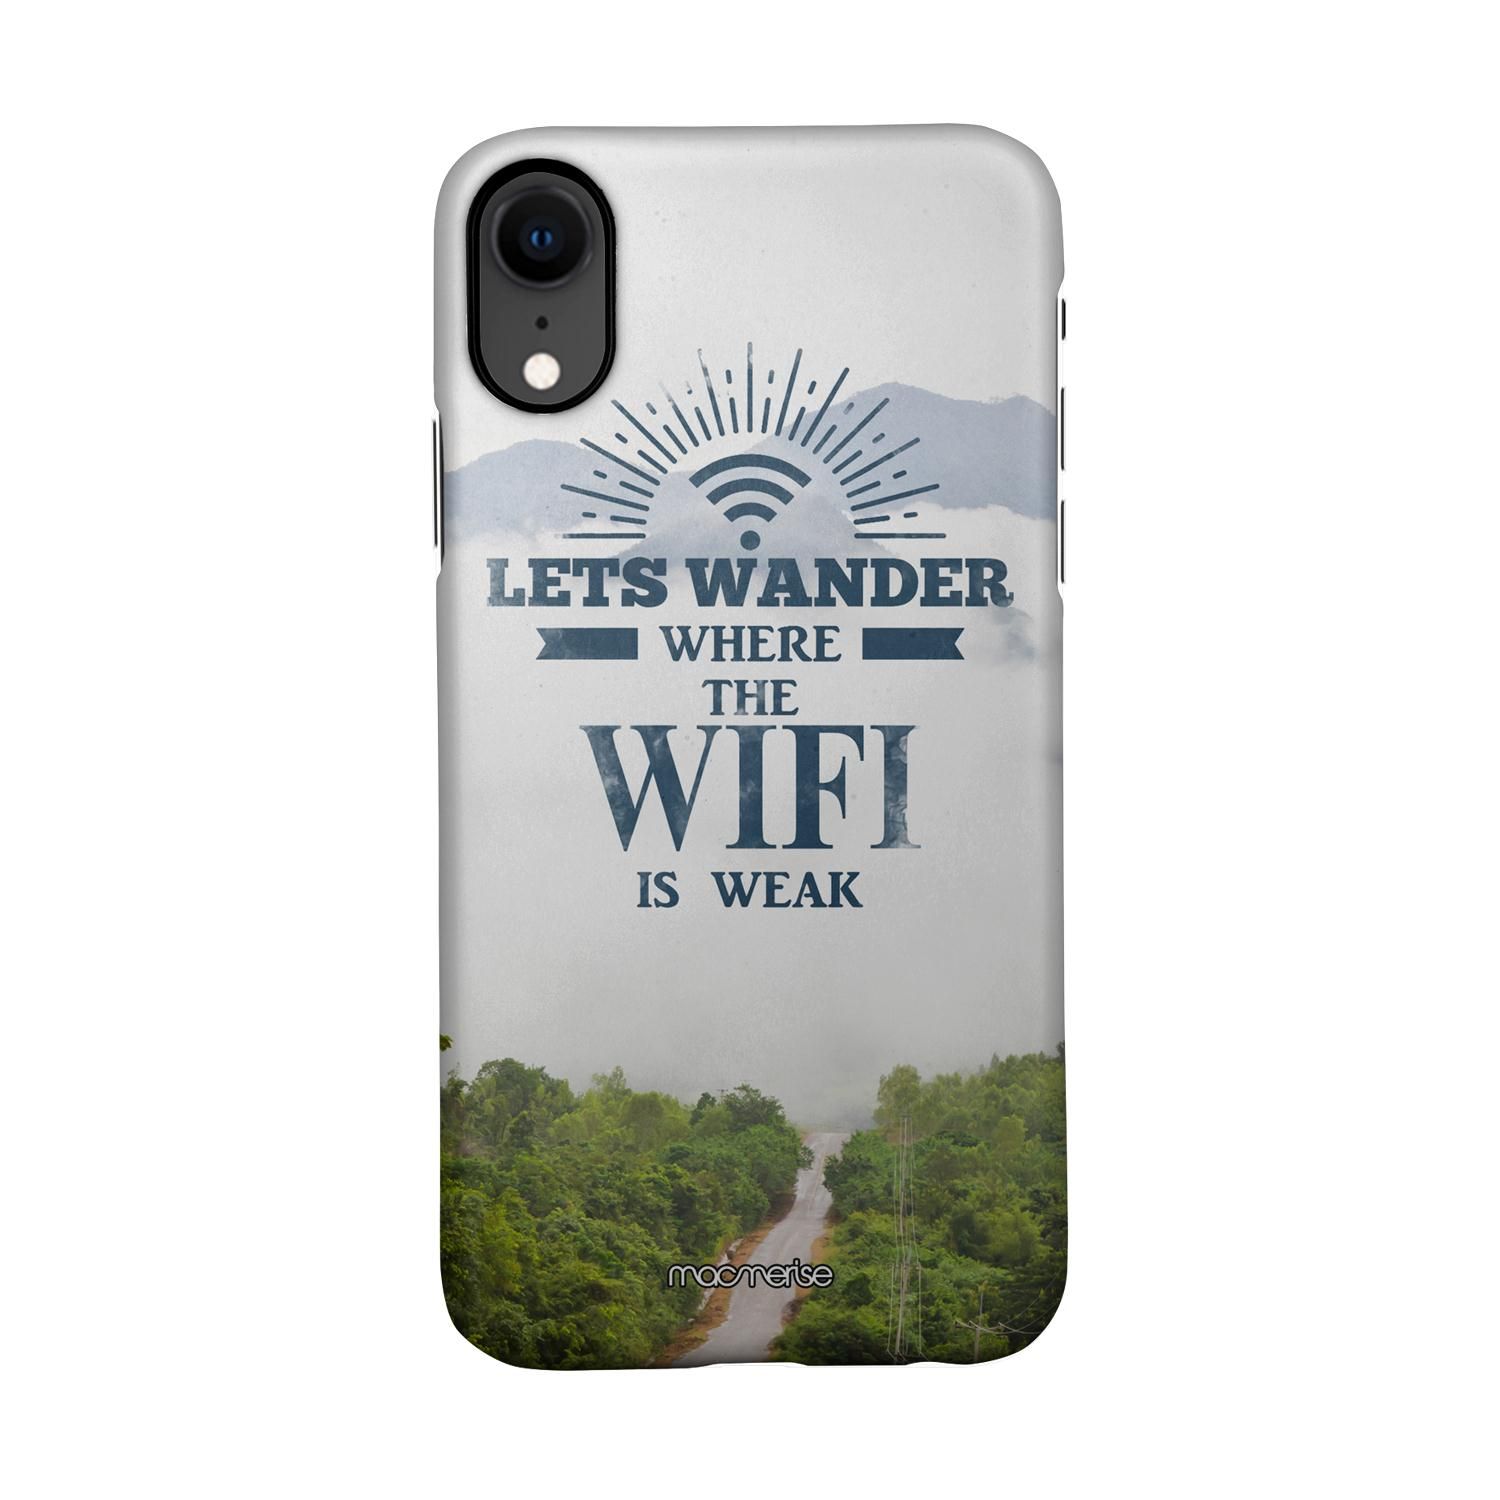 Wander without Wifi - Sleek Phone Case for iPhone XR